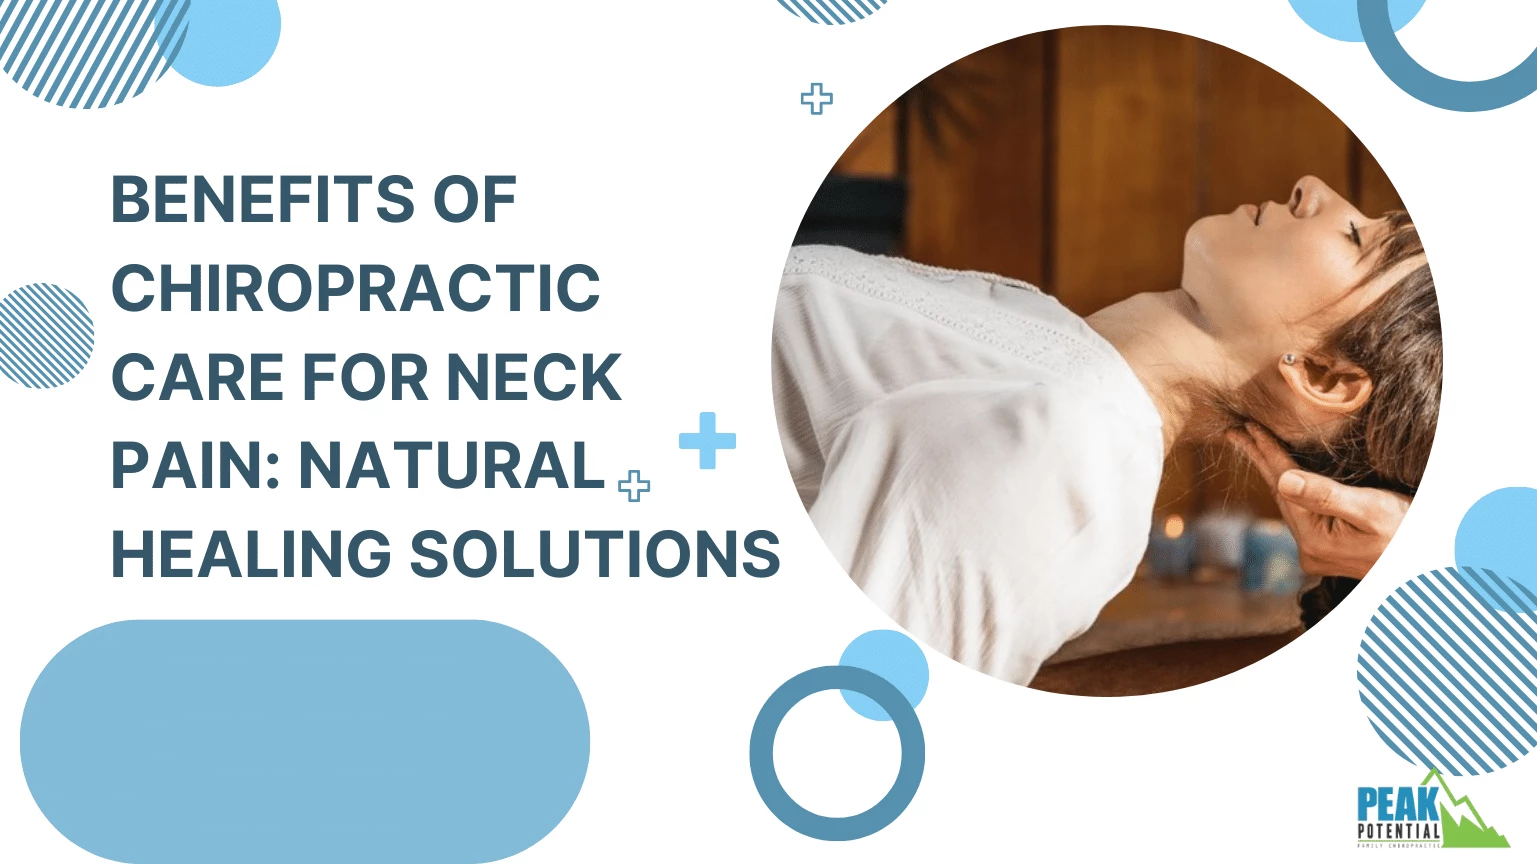 Benefits of Chiropractic Care for Neck Pain Natural Healing Solutions